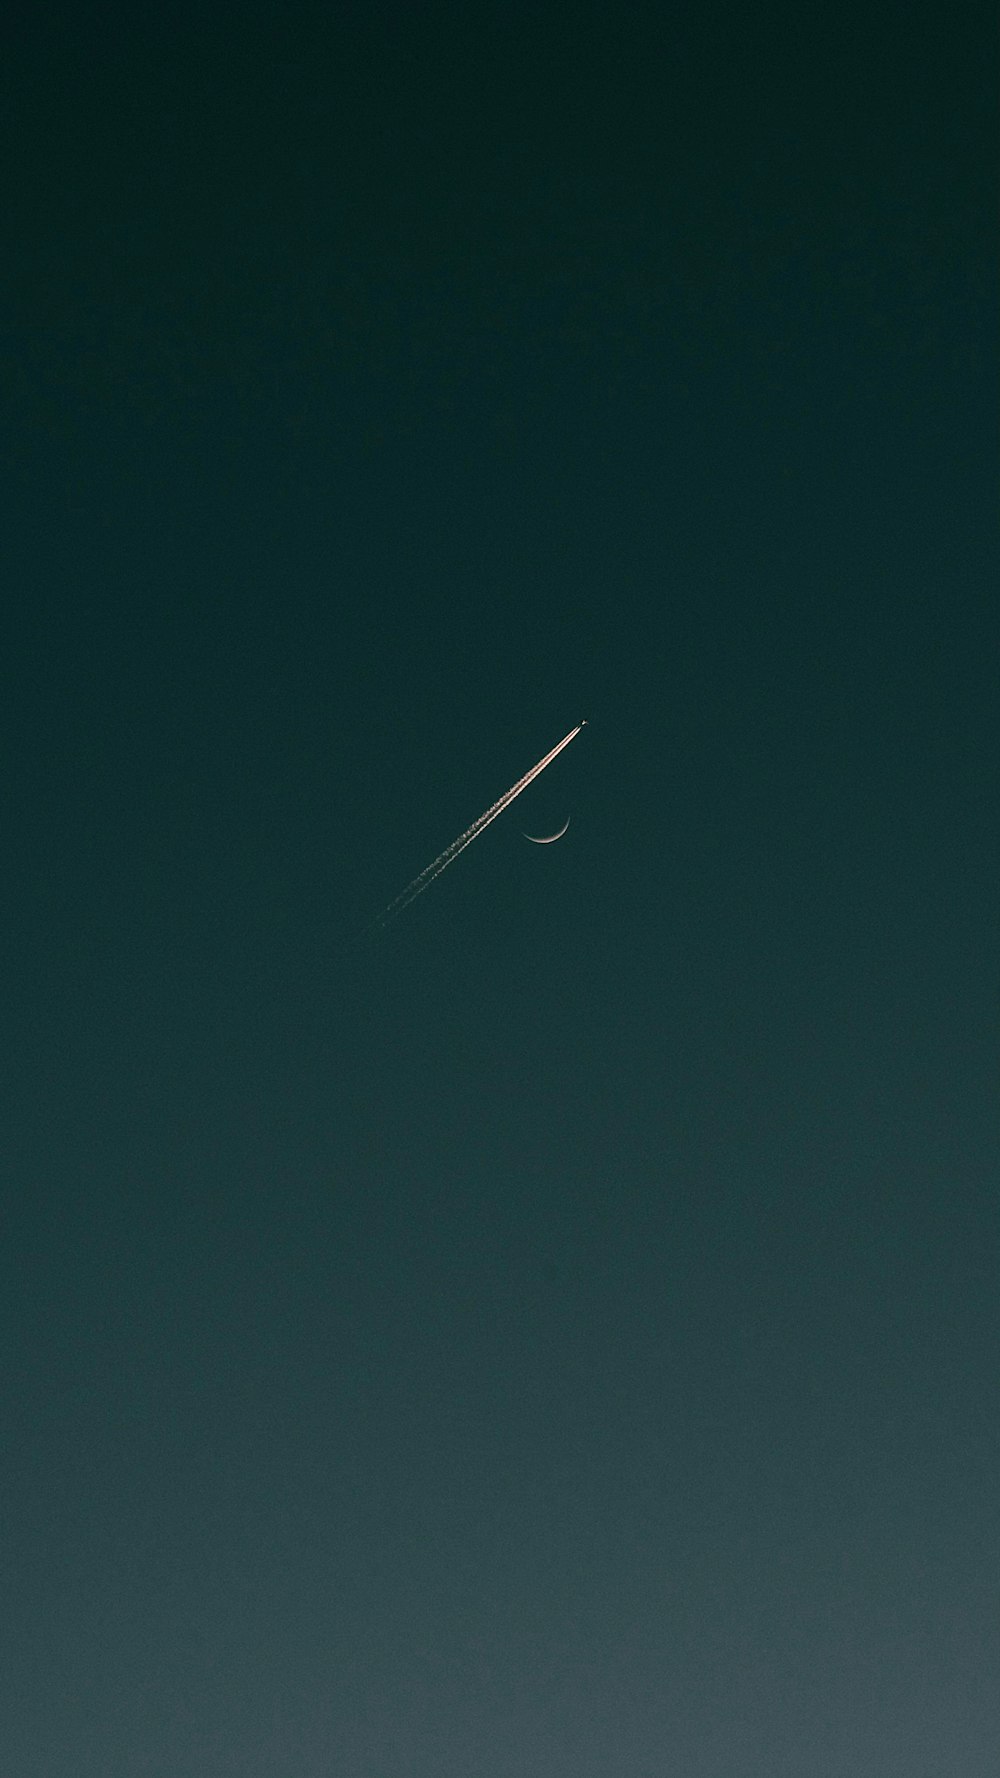 an airplane flying in the sky with a crescent moon